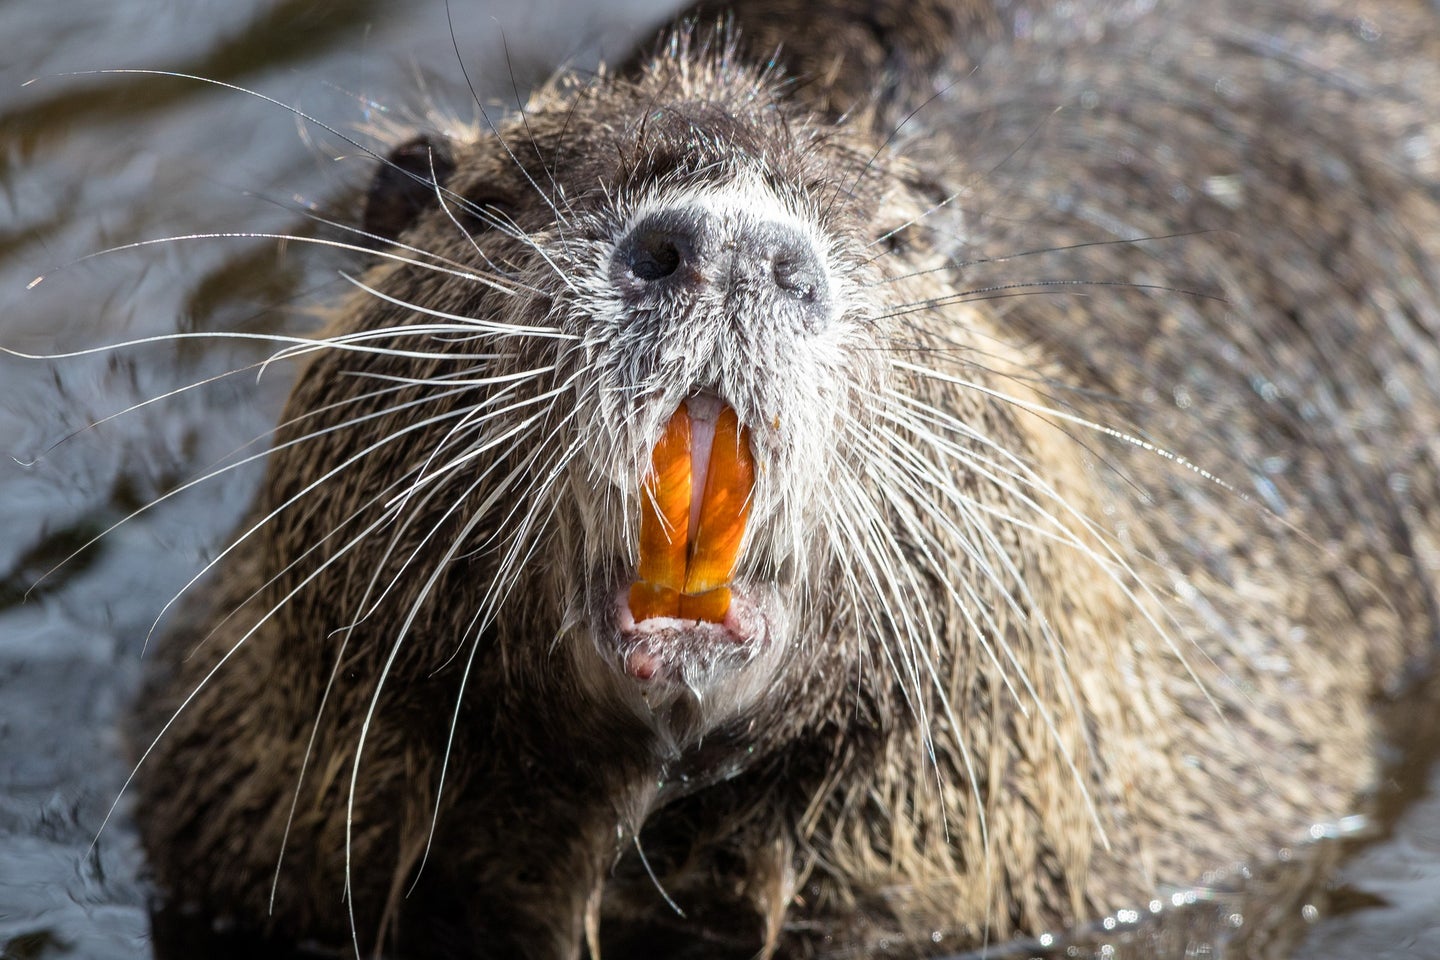 Beaver attacks are rare, but a rabid animal nearly killed a man in Massachusetts. 